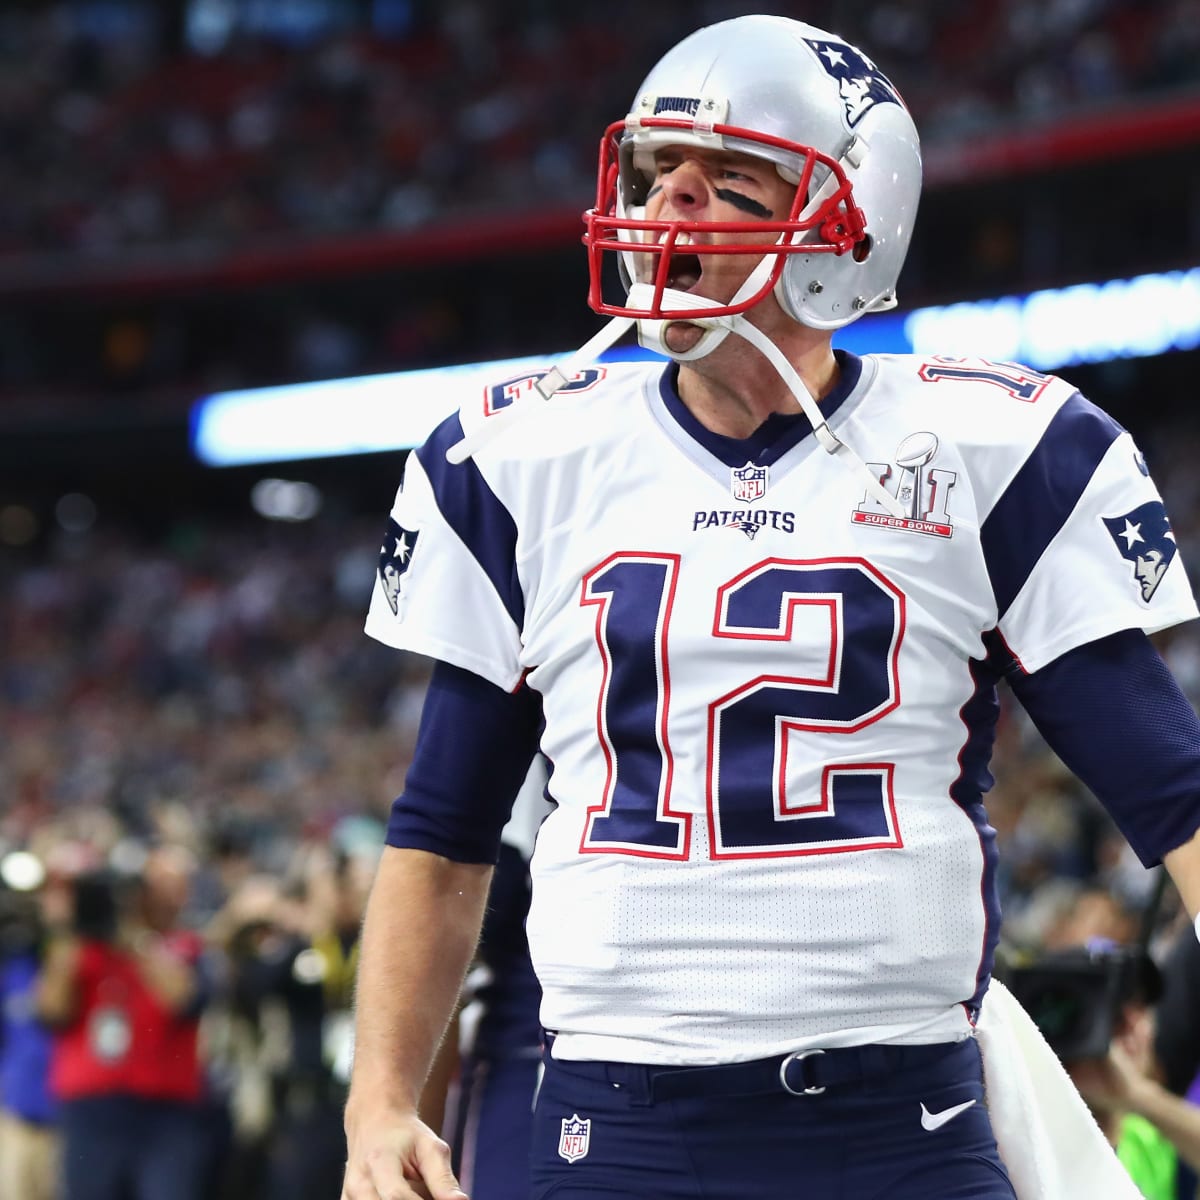 Patriots-Eagles Super Bowl Uniforms: New England in white - Sports  Illustrated